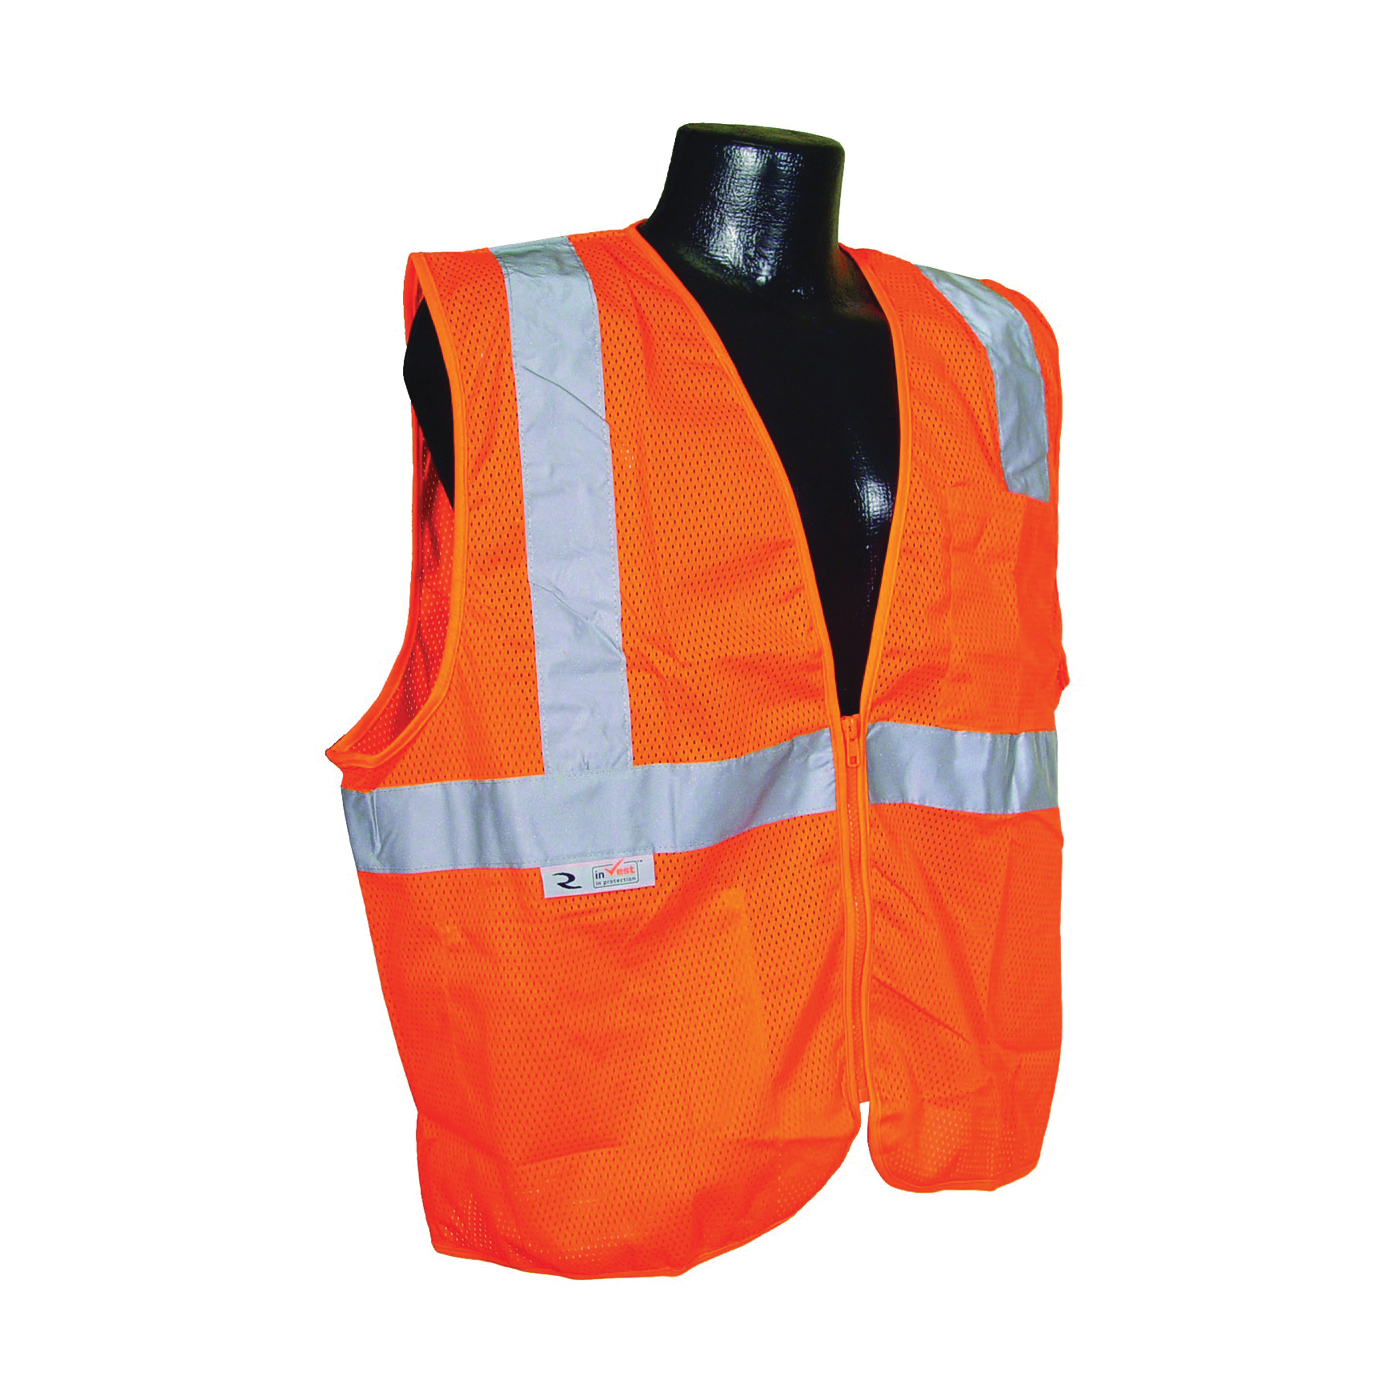 SV2ZOM-2X Economical Safety Vest, 2XL, Unisex, Fits to Chest Size: 30 in, Polyester, Orange/Silver